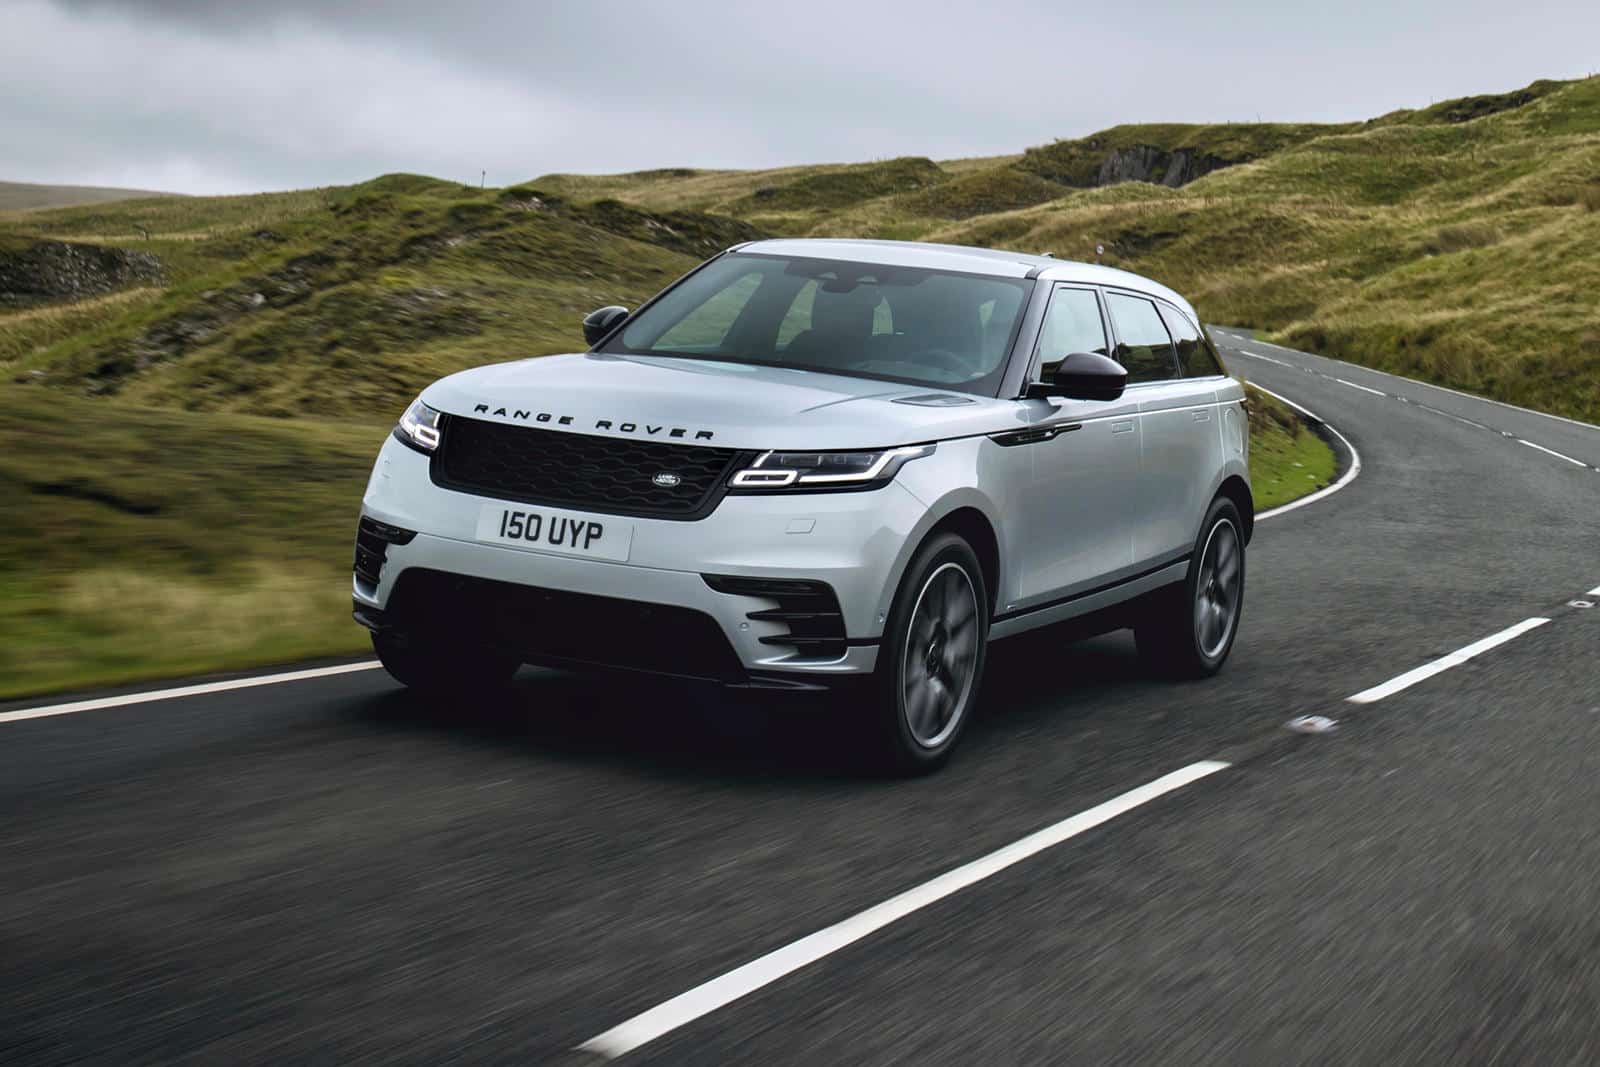 A white range rover velar driving across a paved road in the green hills of the northern united kingdom.